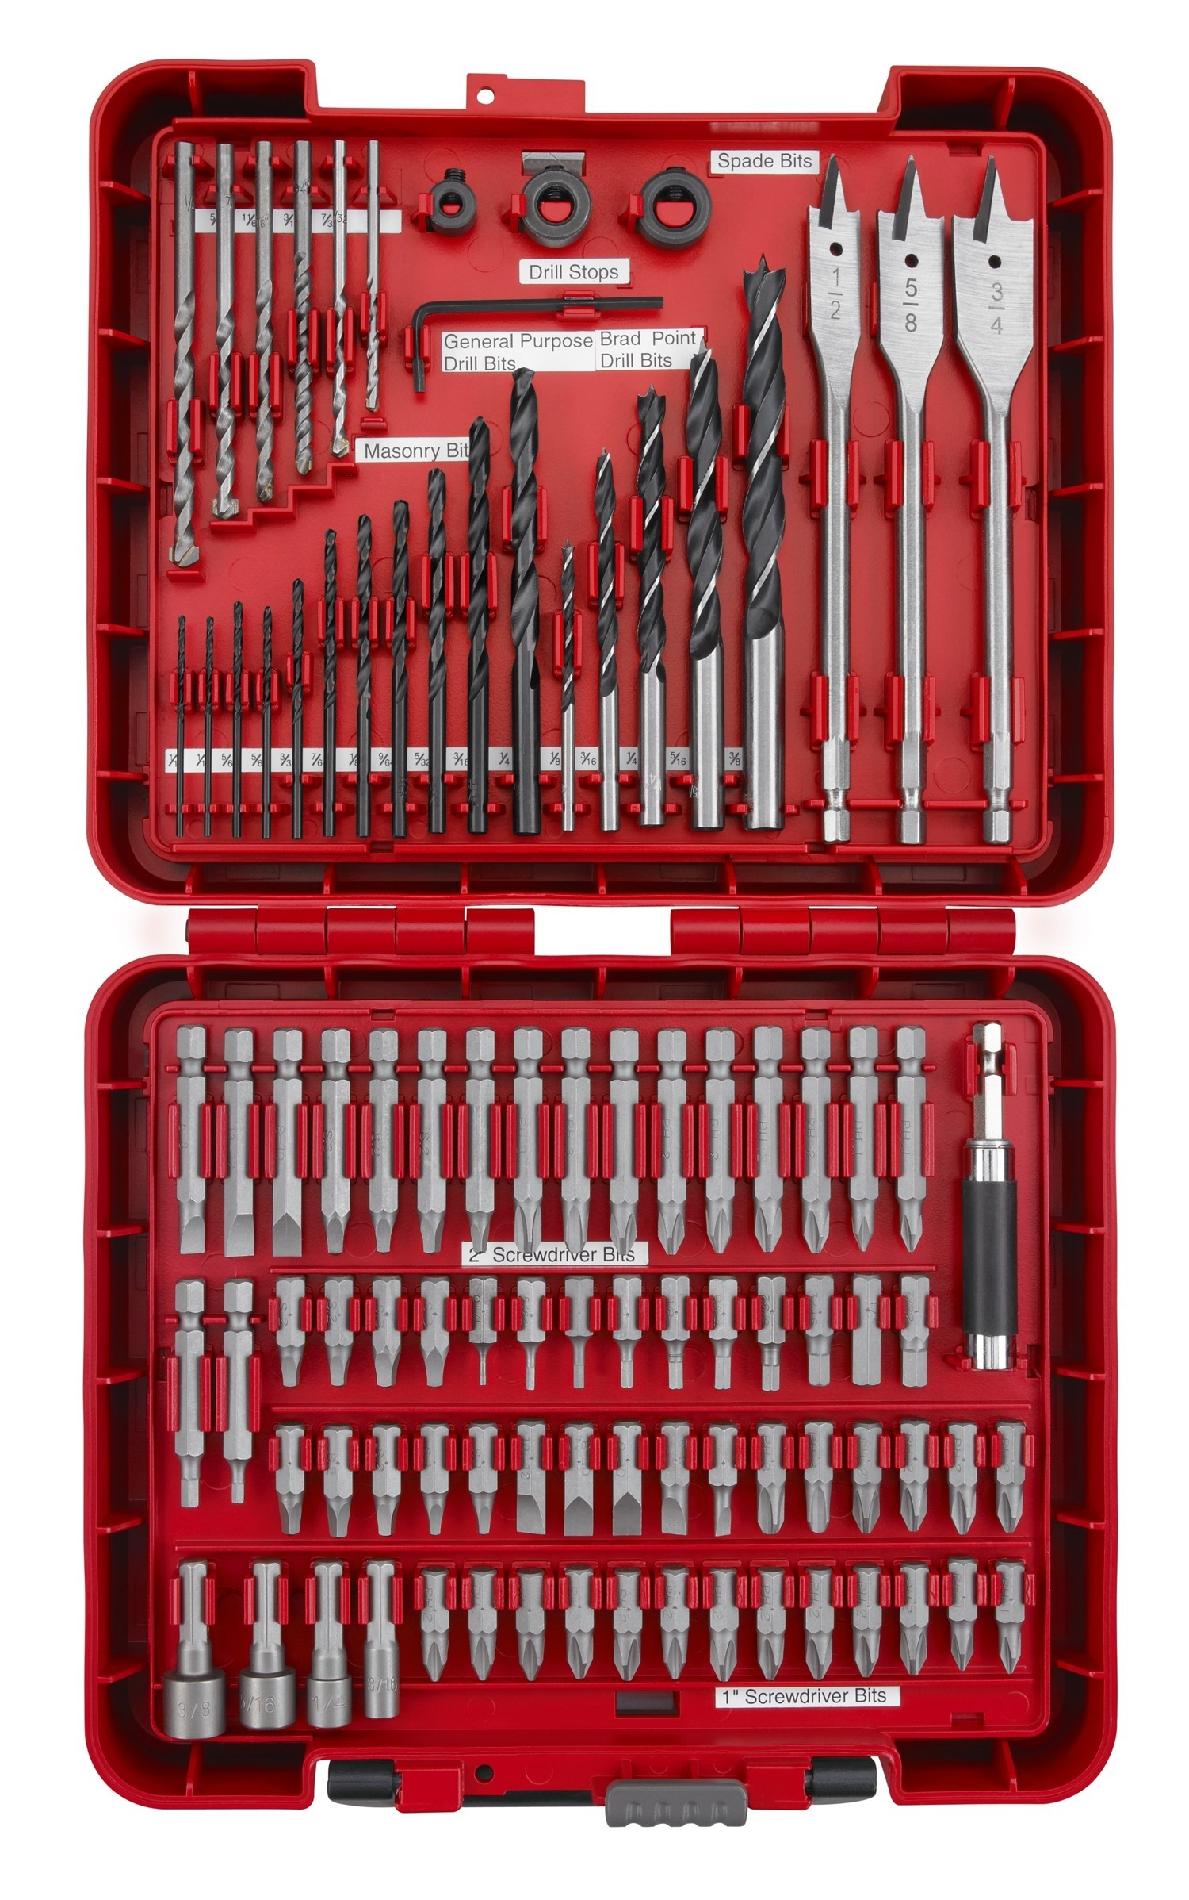 Craftsman 100-PC Screwdriver and Drill Accessory Kit Just $14.99 With Free Pickup!